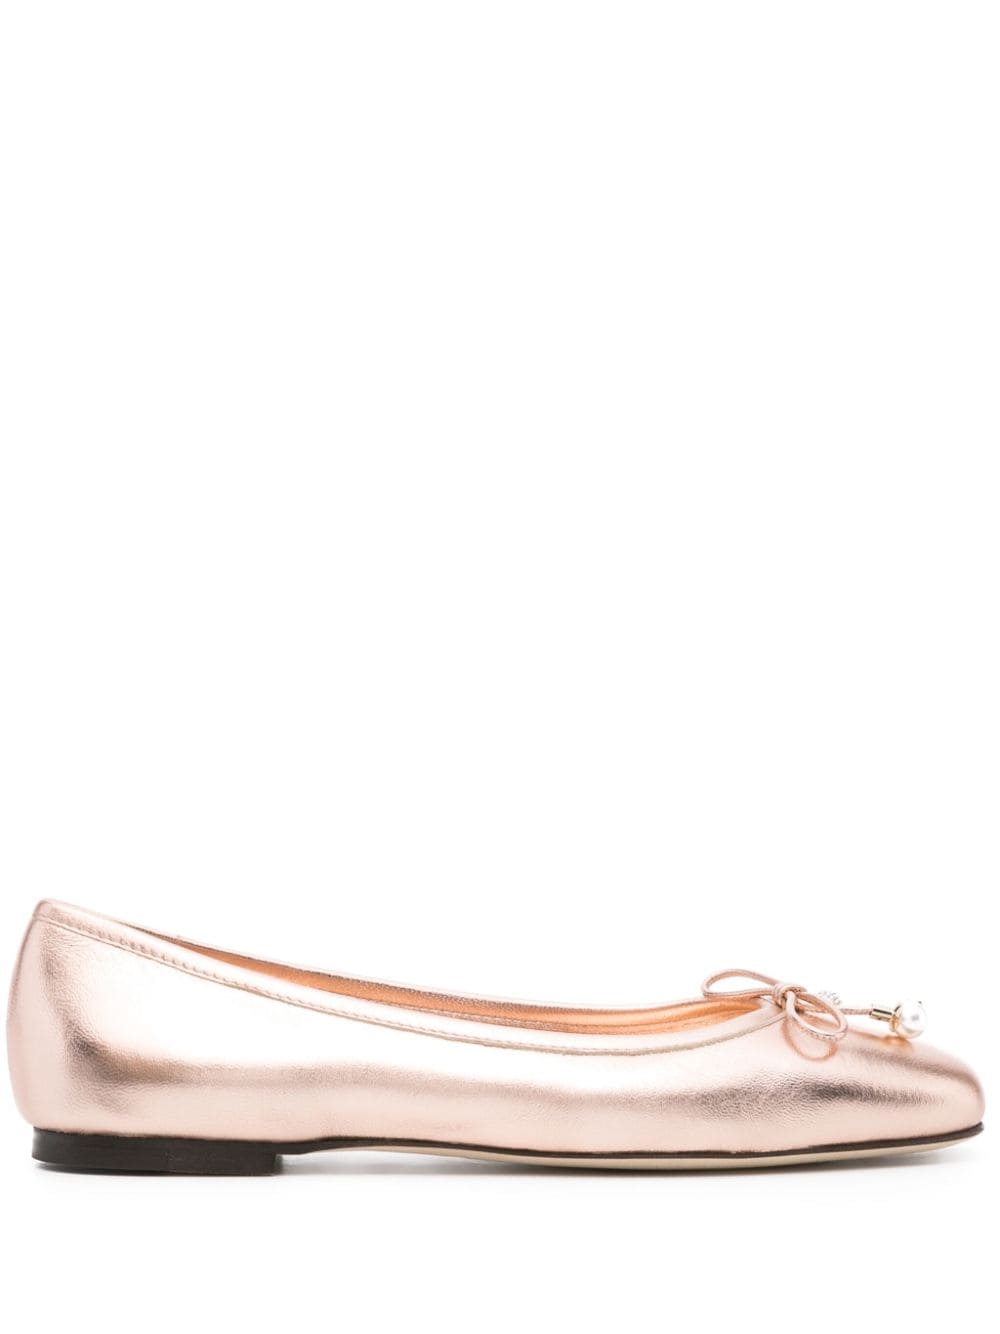 JIMMY CHOO Powder Pink Metallic Leather Ballet Flats with Bow Detailing and Square Toe